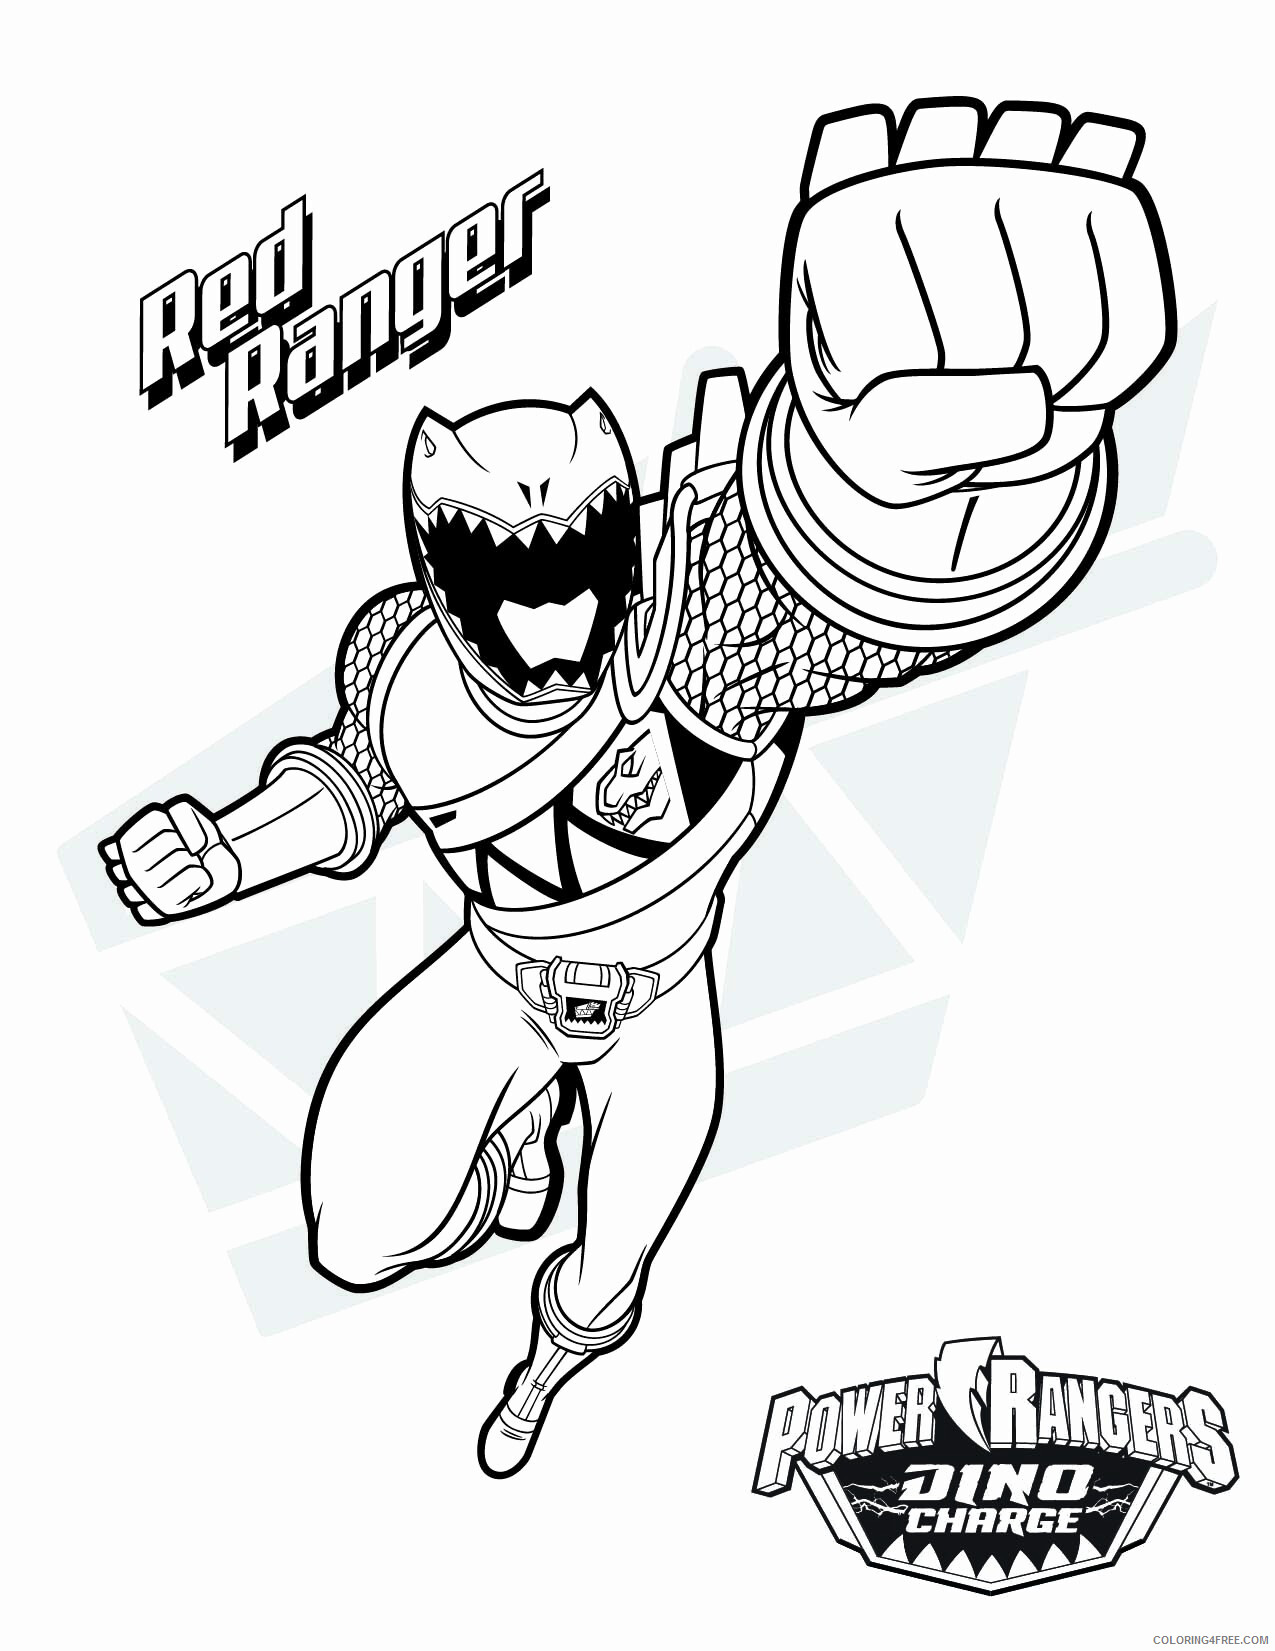 Power Rangers Coloring Pages TV Film mighty morphin Printable 2020 06671 Coloring4free